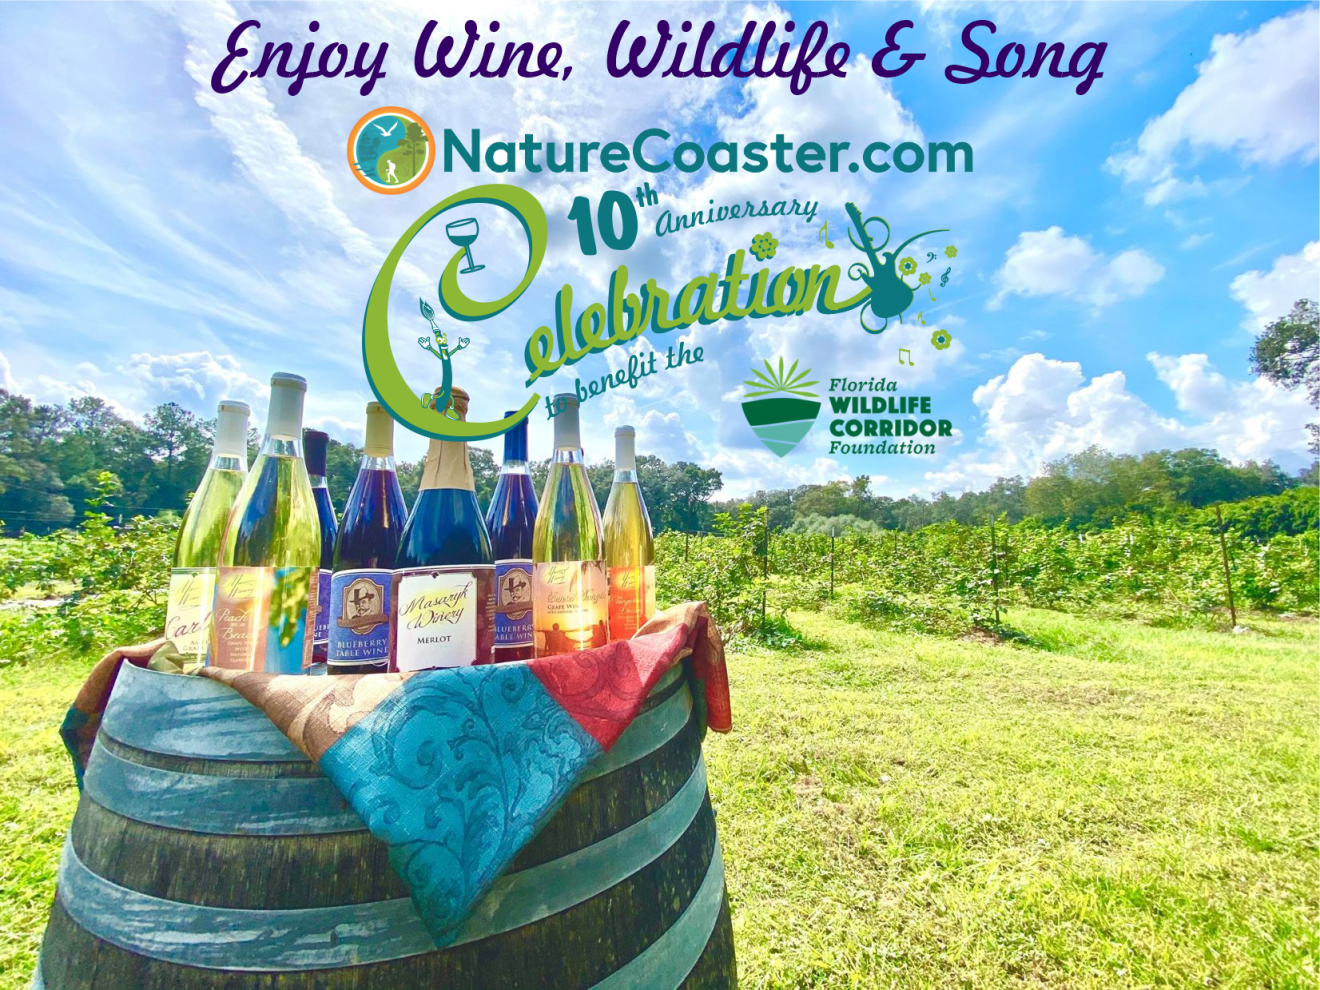 You are Invited to the Nature Coast Celebration April 6 for Art, Food, Wine & Music for a Great Cause